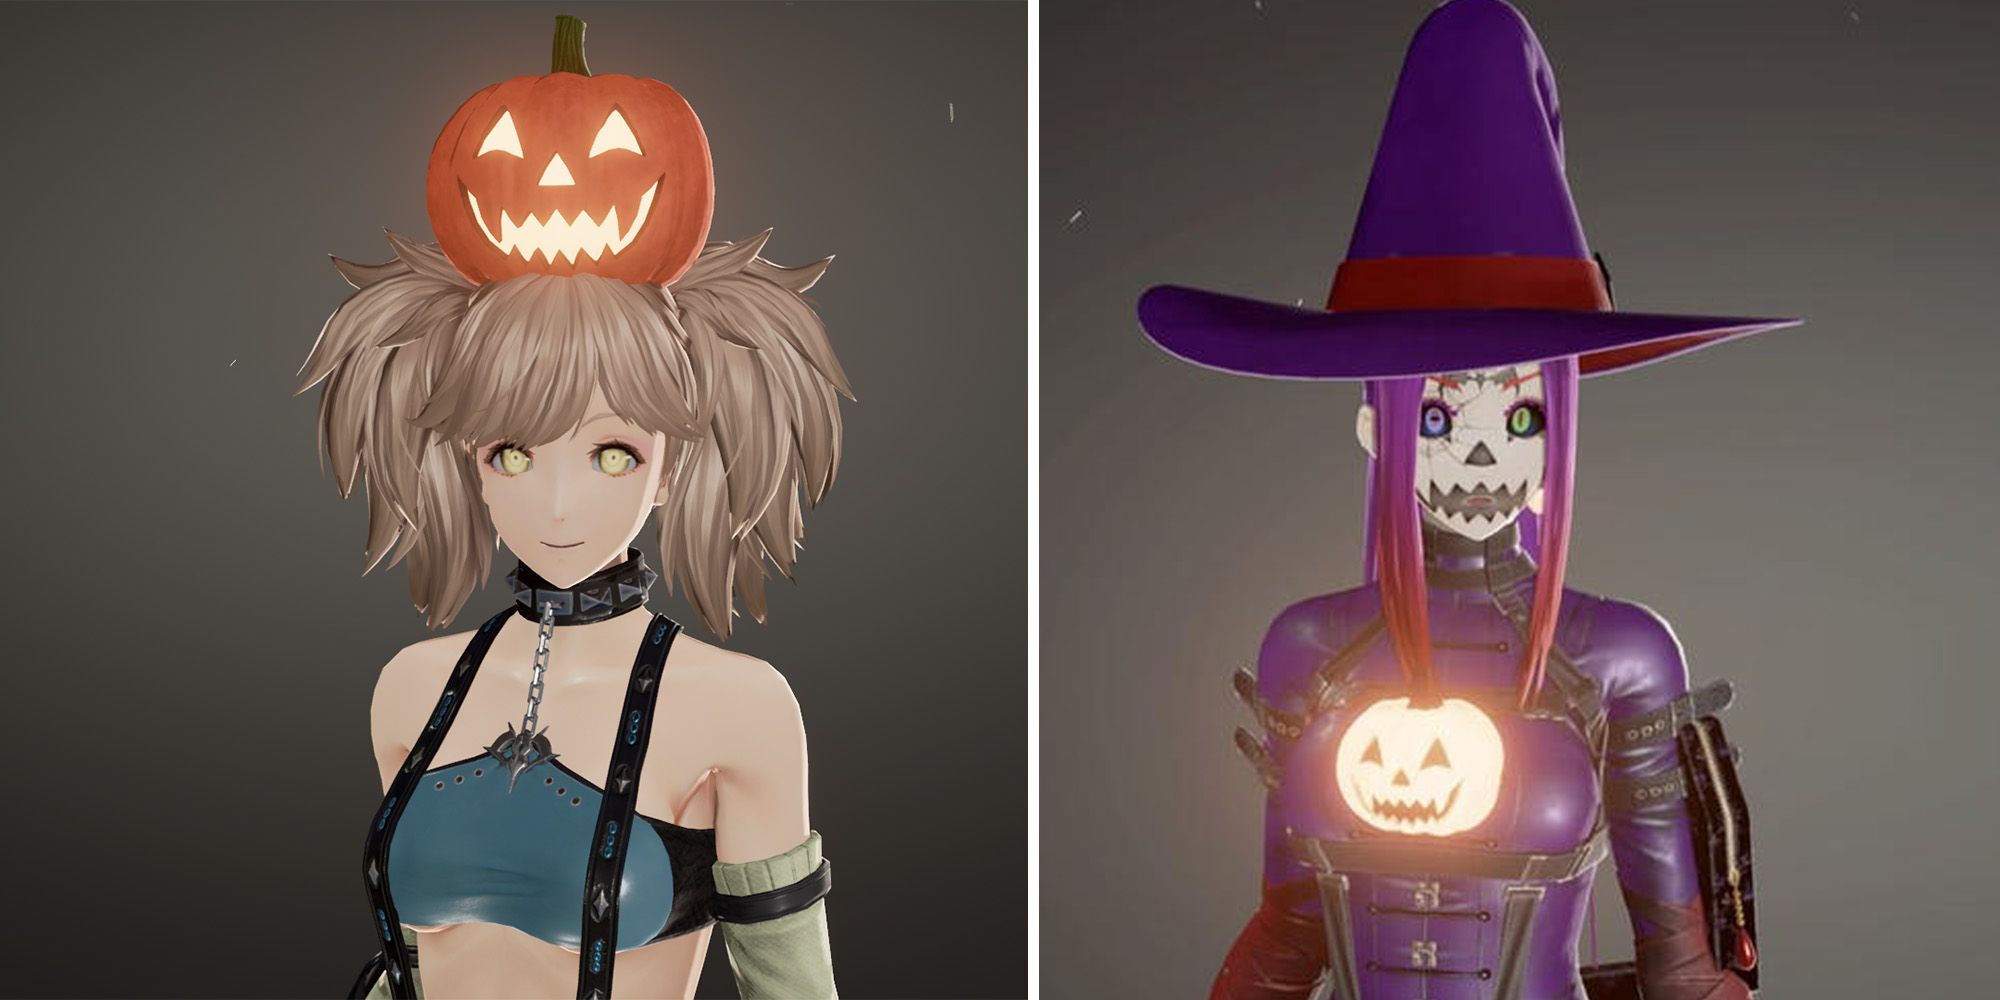 Pumpkin Accessory being utilized in the Code Vein character creator